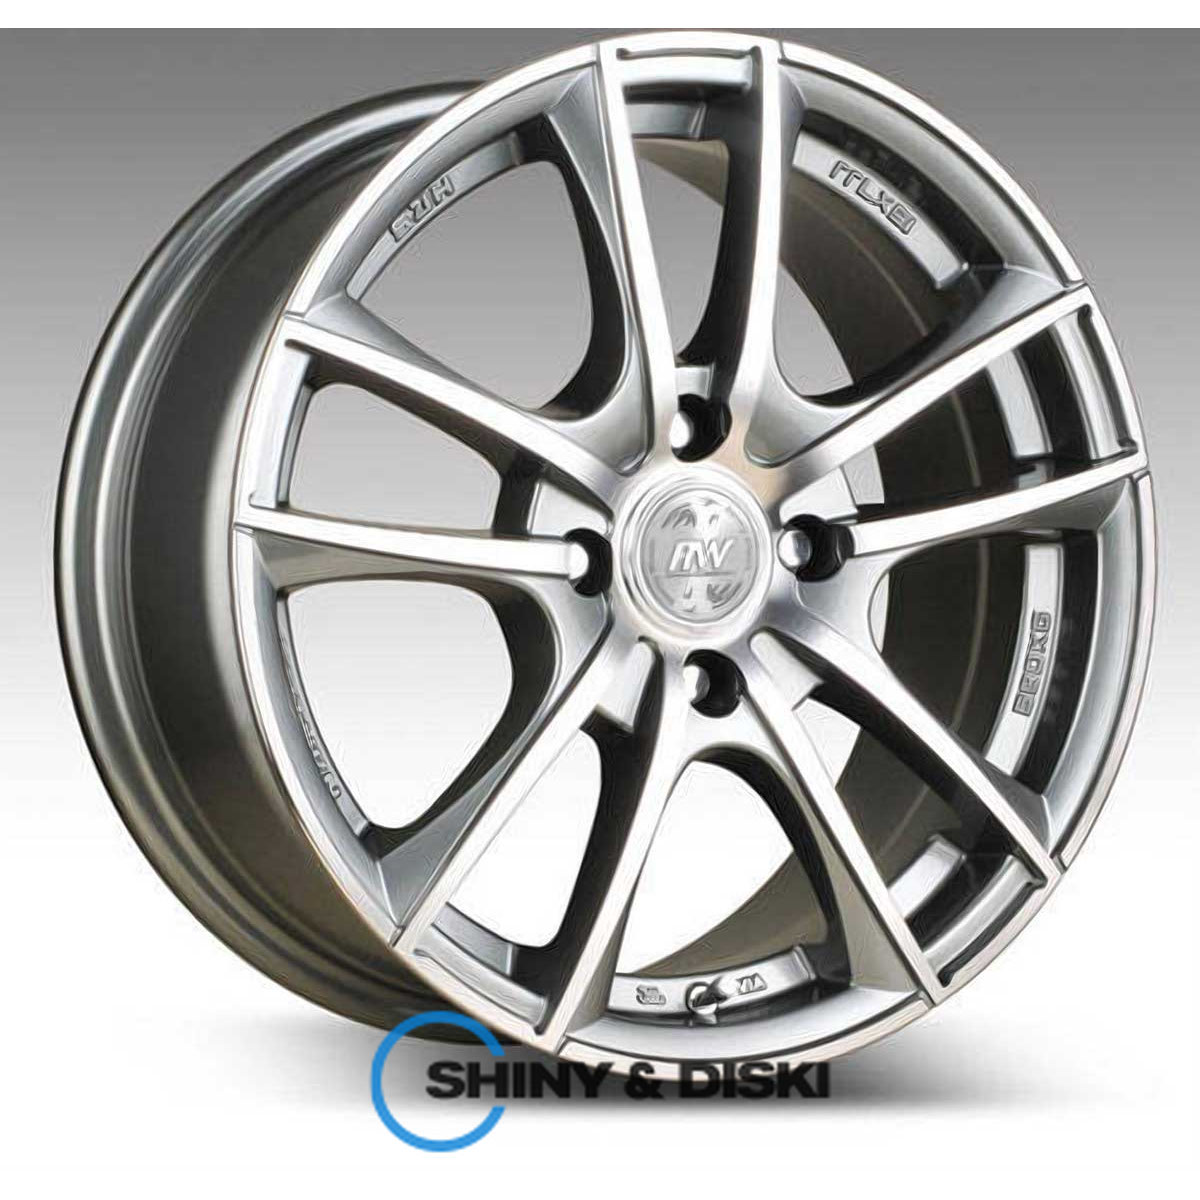 rs tuning h-505 ddnfp r15 w6.5 pcd5x114.3 et40 dia73.1